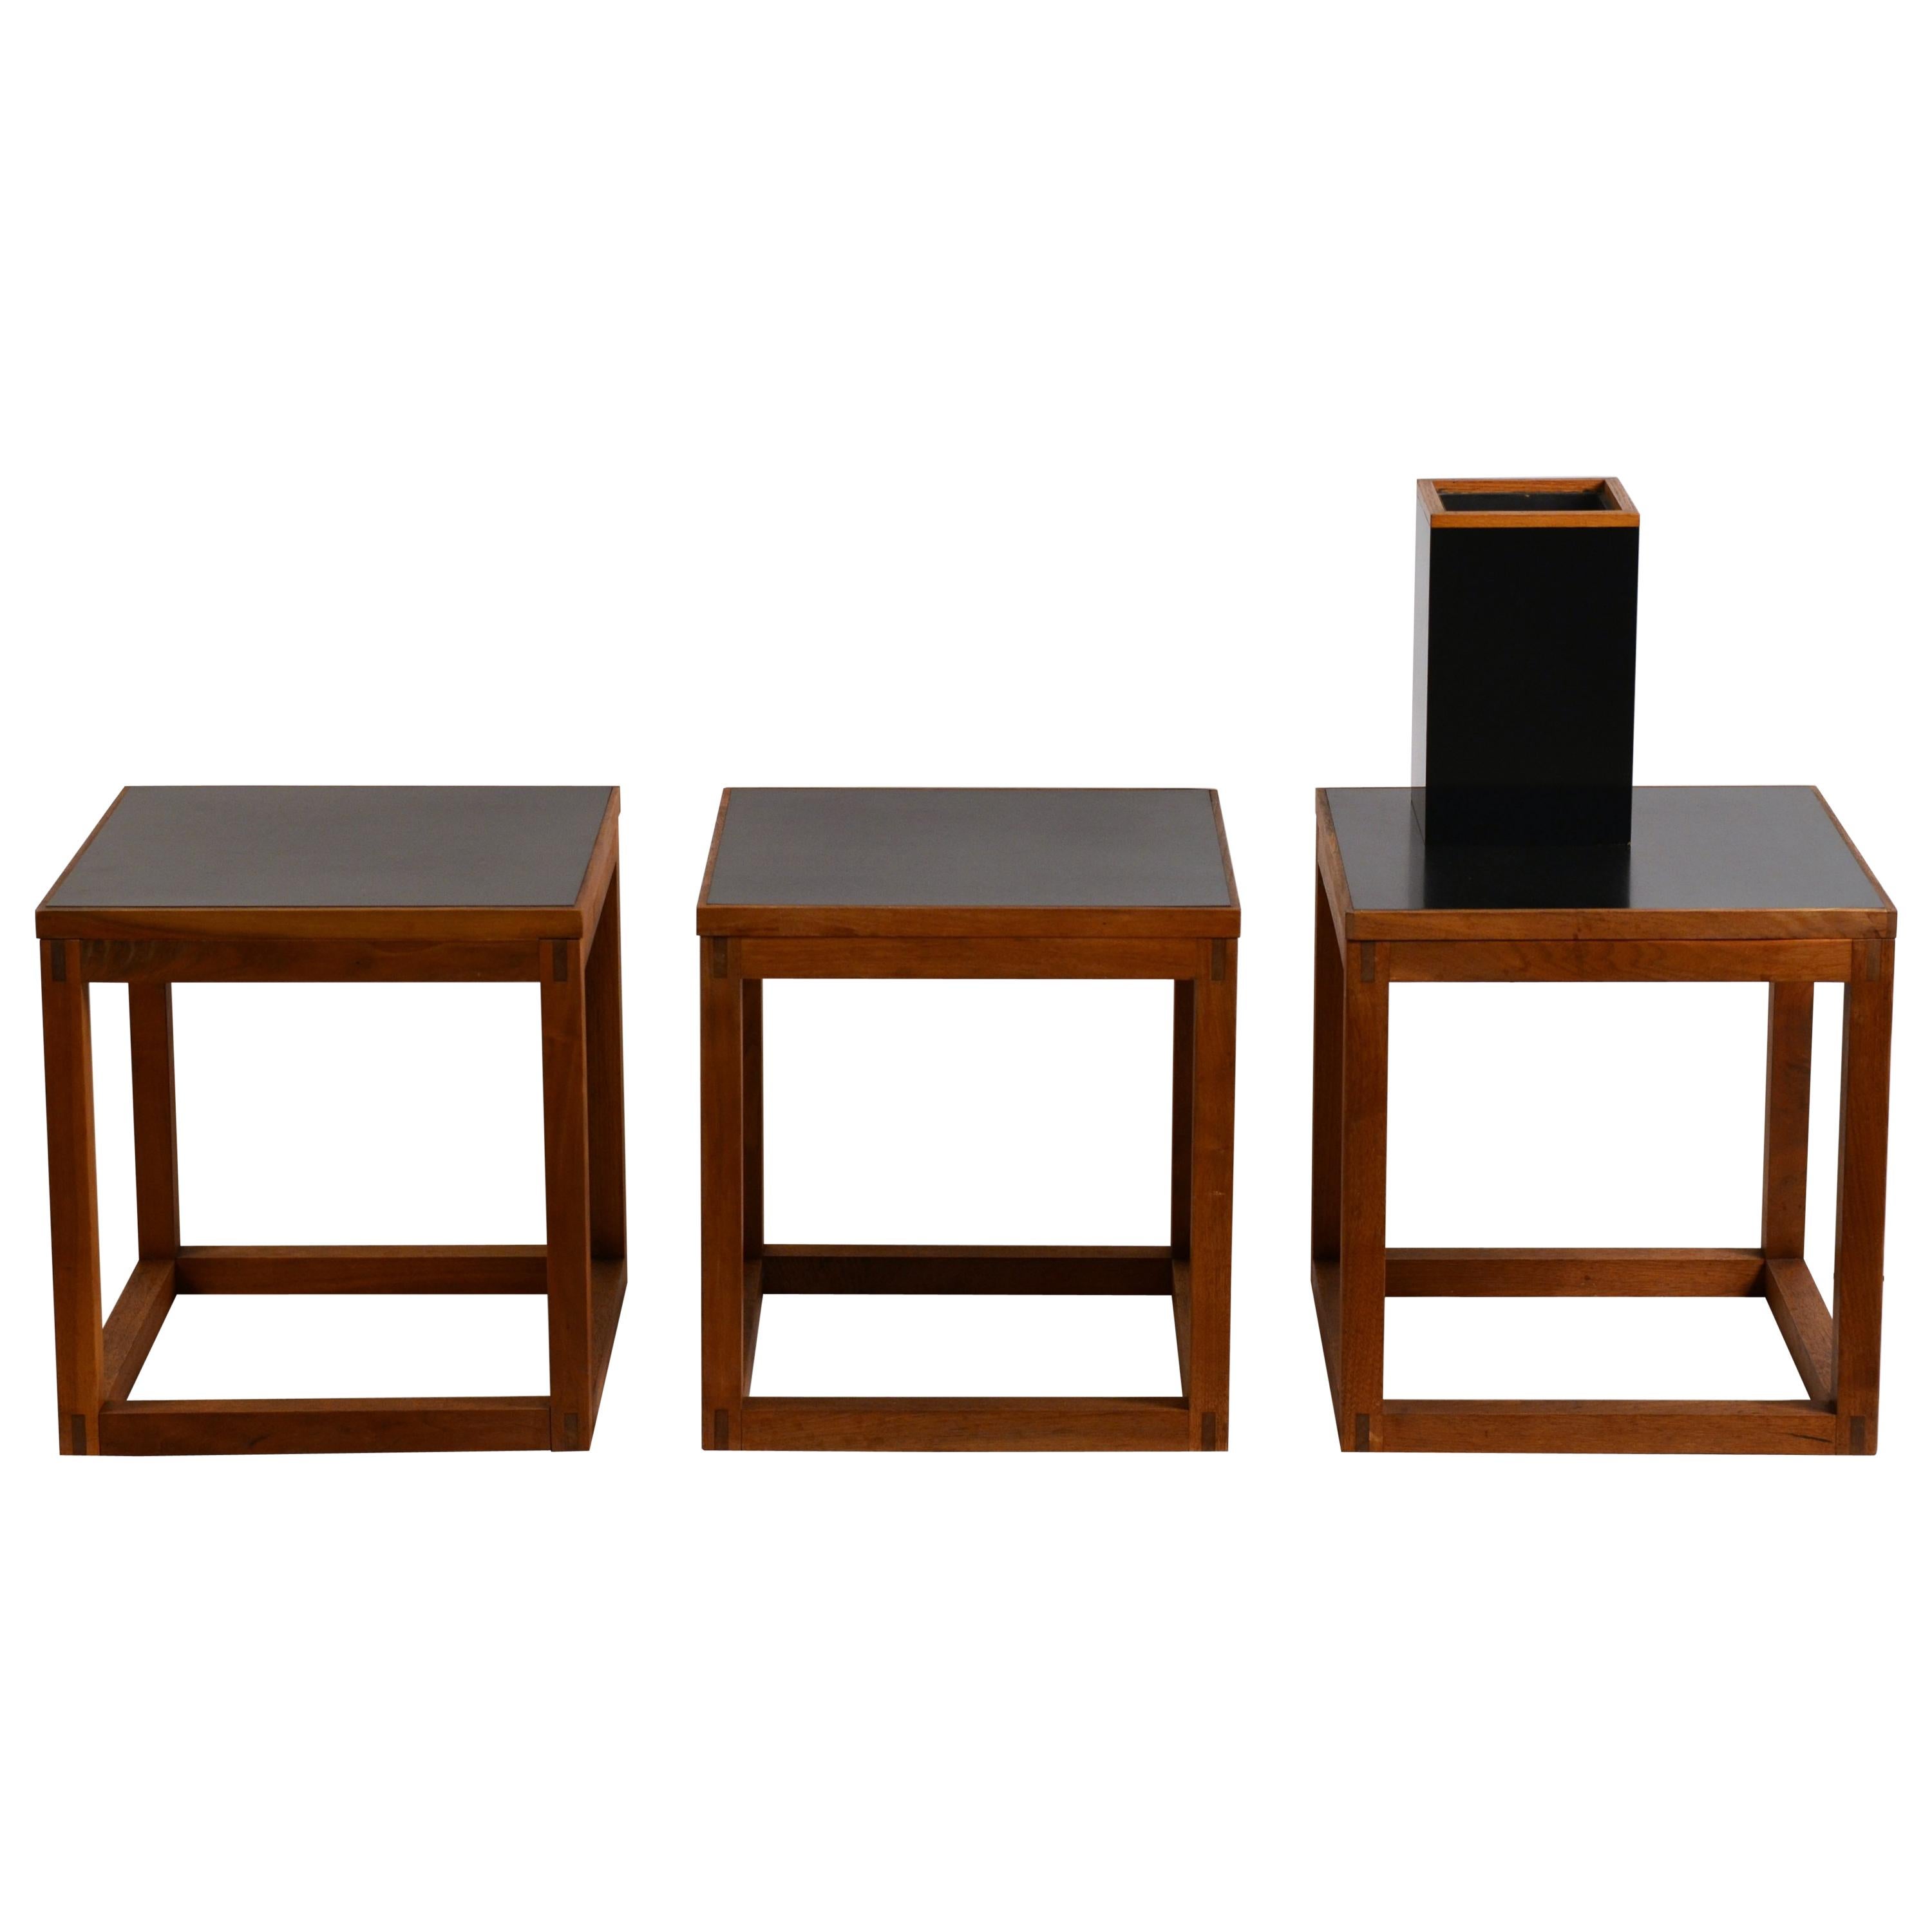 Set of 3 Minimal Teak and Laminate Cube Coffee table or Side Tables